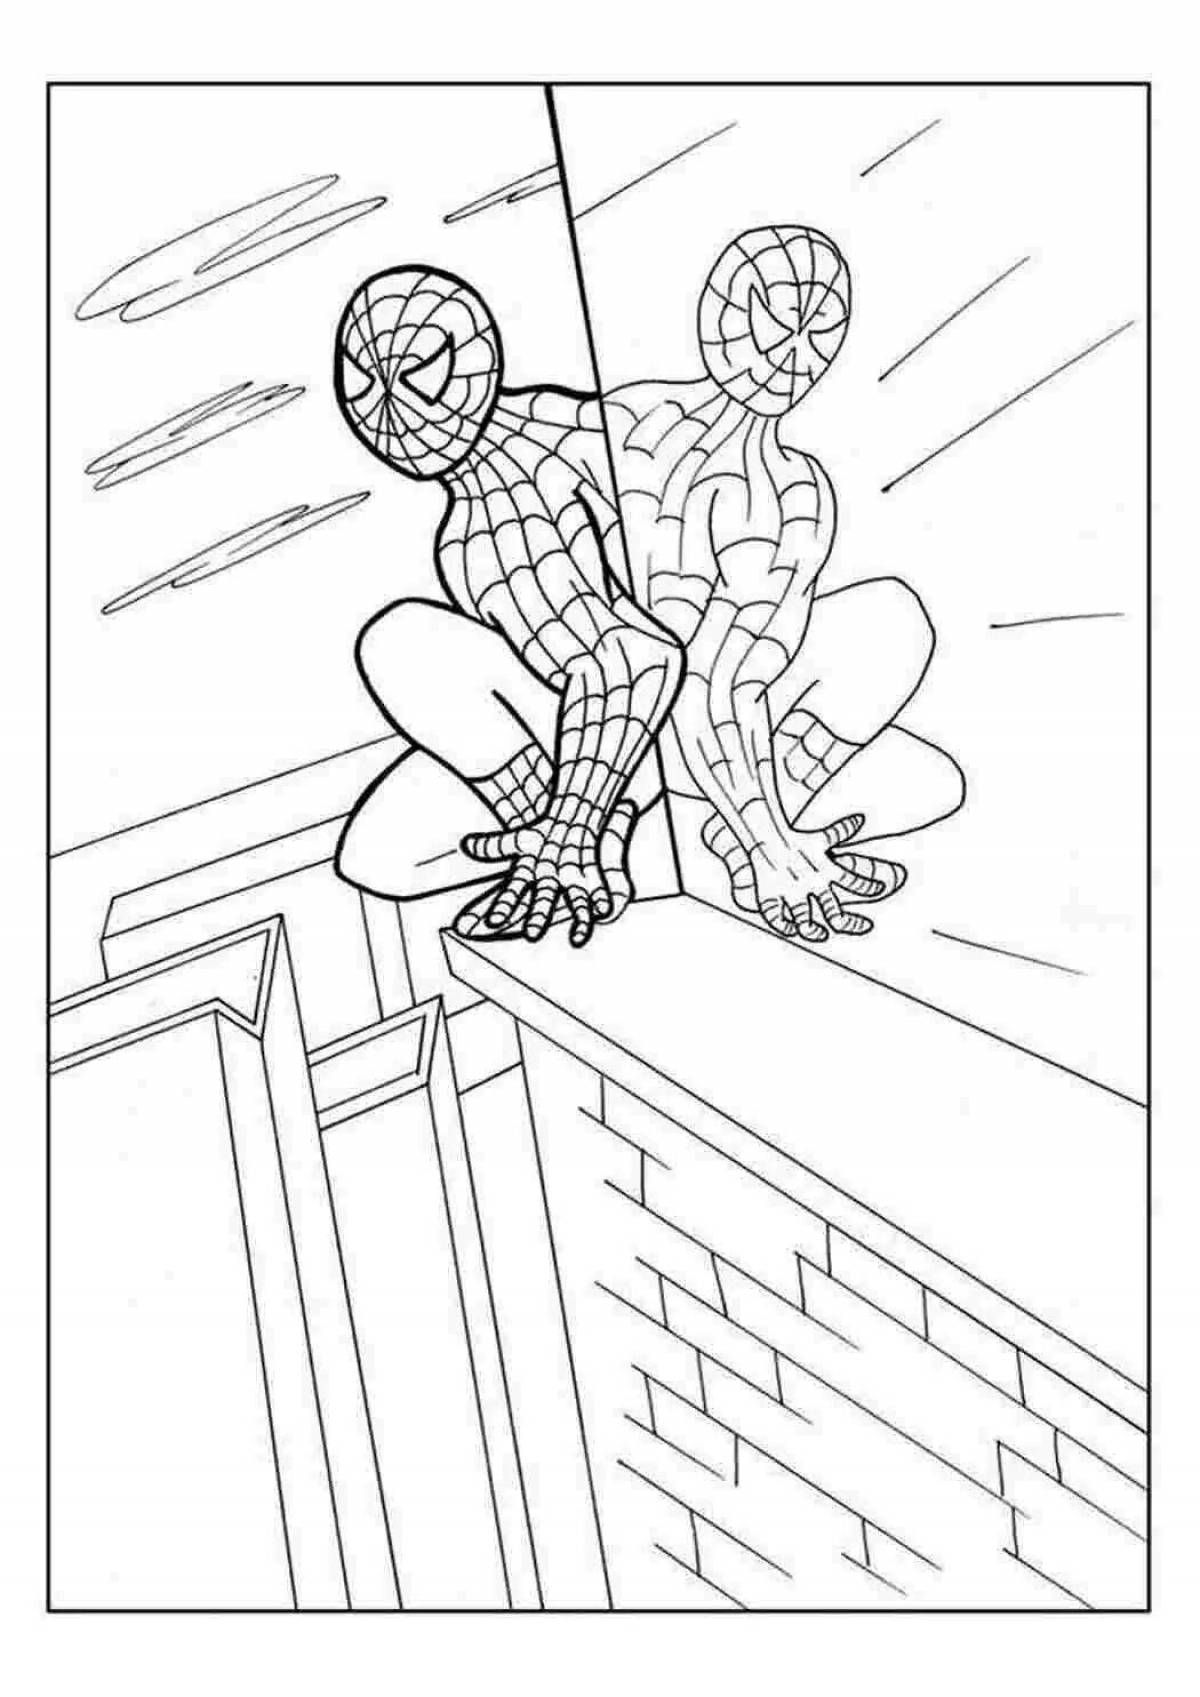 Fascinating comic spider-man coloring page